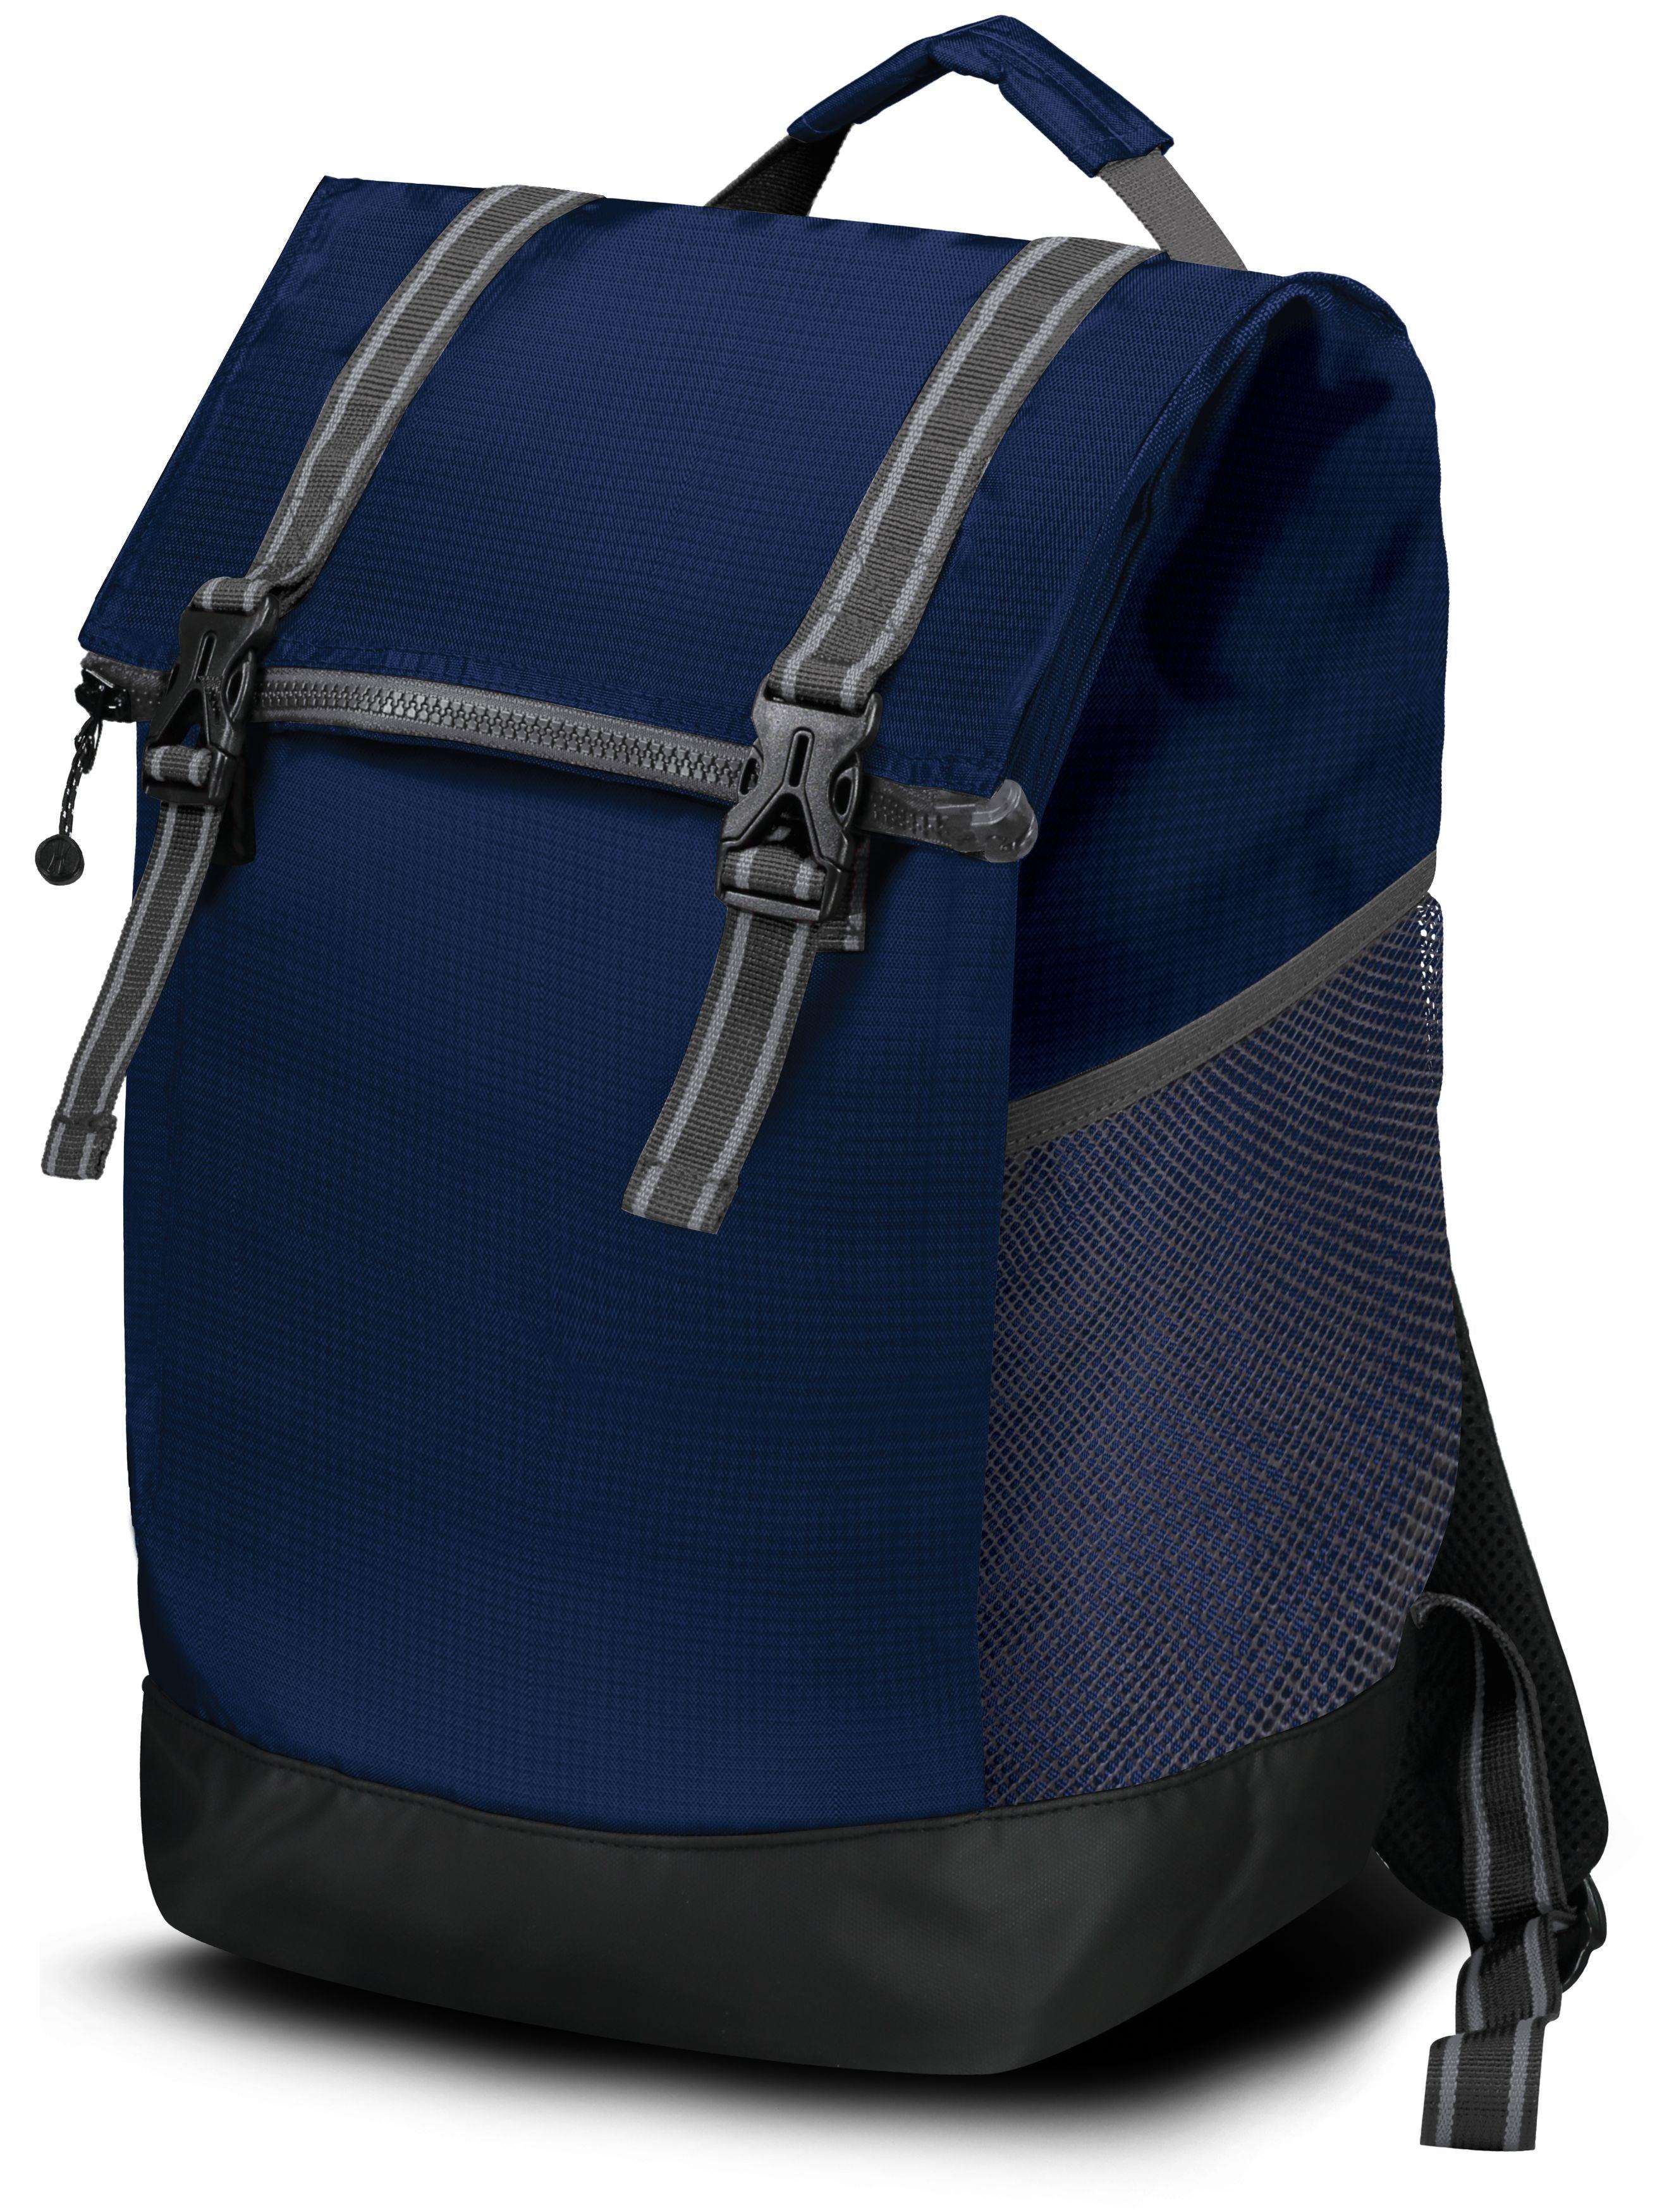 Expedition Backpack - Dresses Max